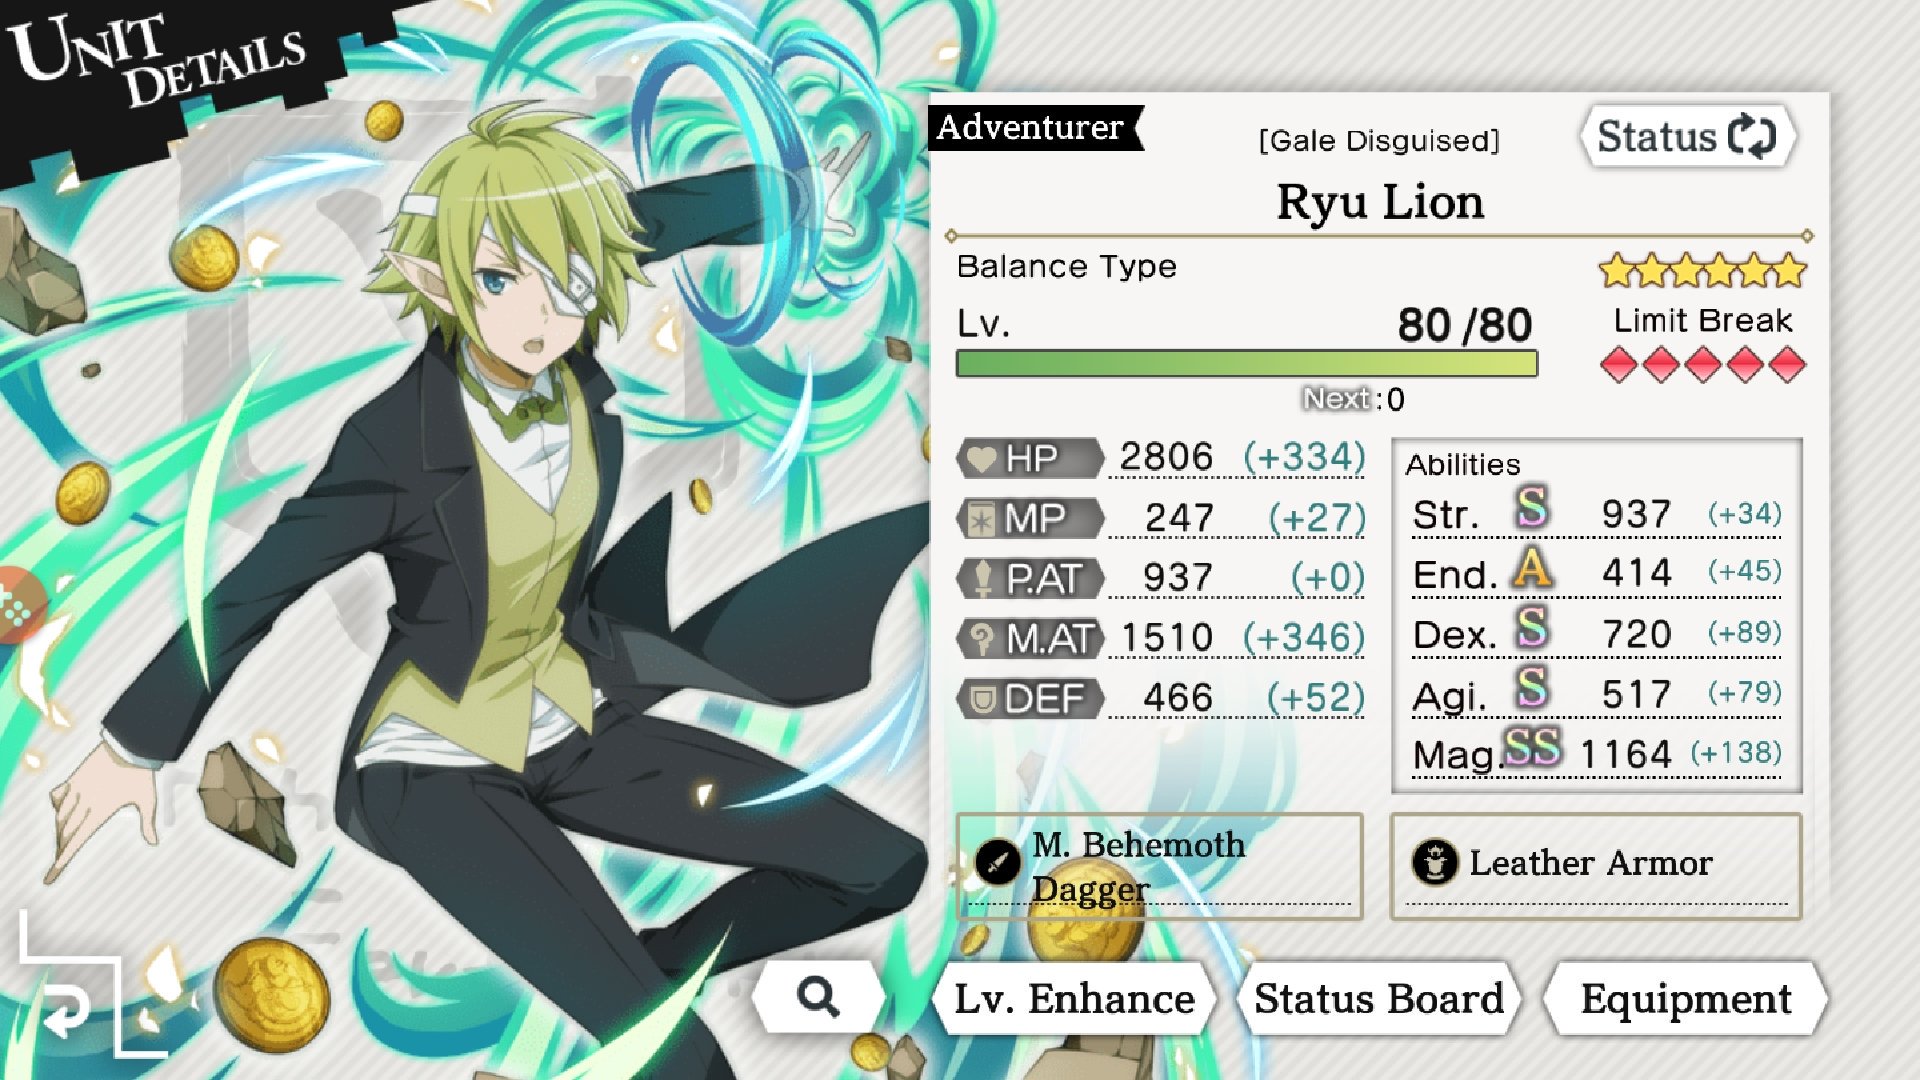 Bloodycard - Ryu Lion is my favorite DanMachi character, especially in Gale disguised, also she is the first character that I max limit break in Memoria Freese